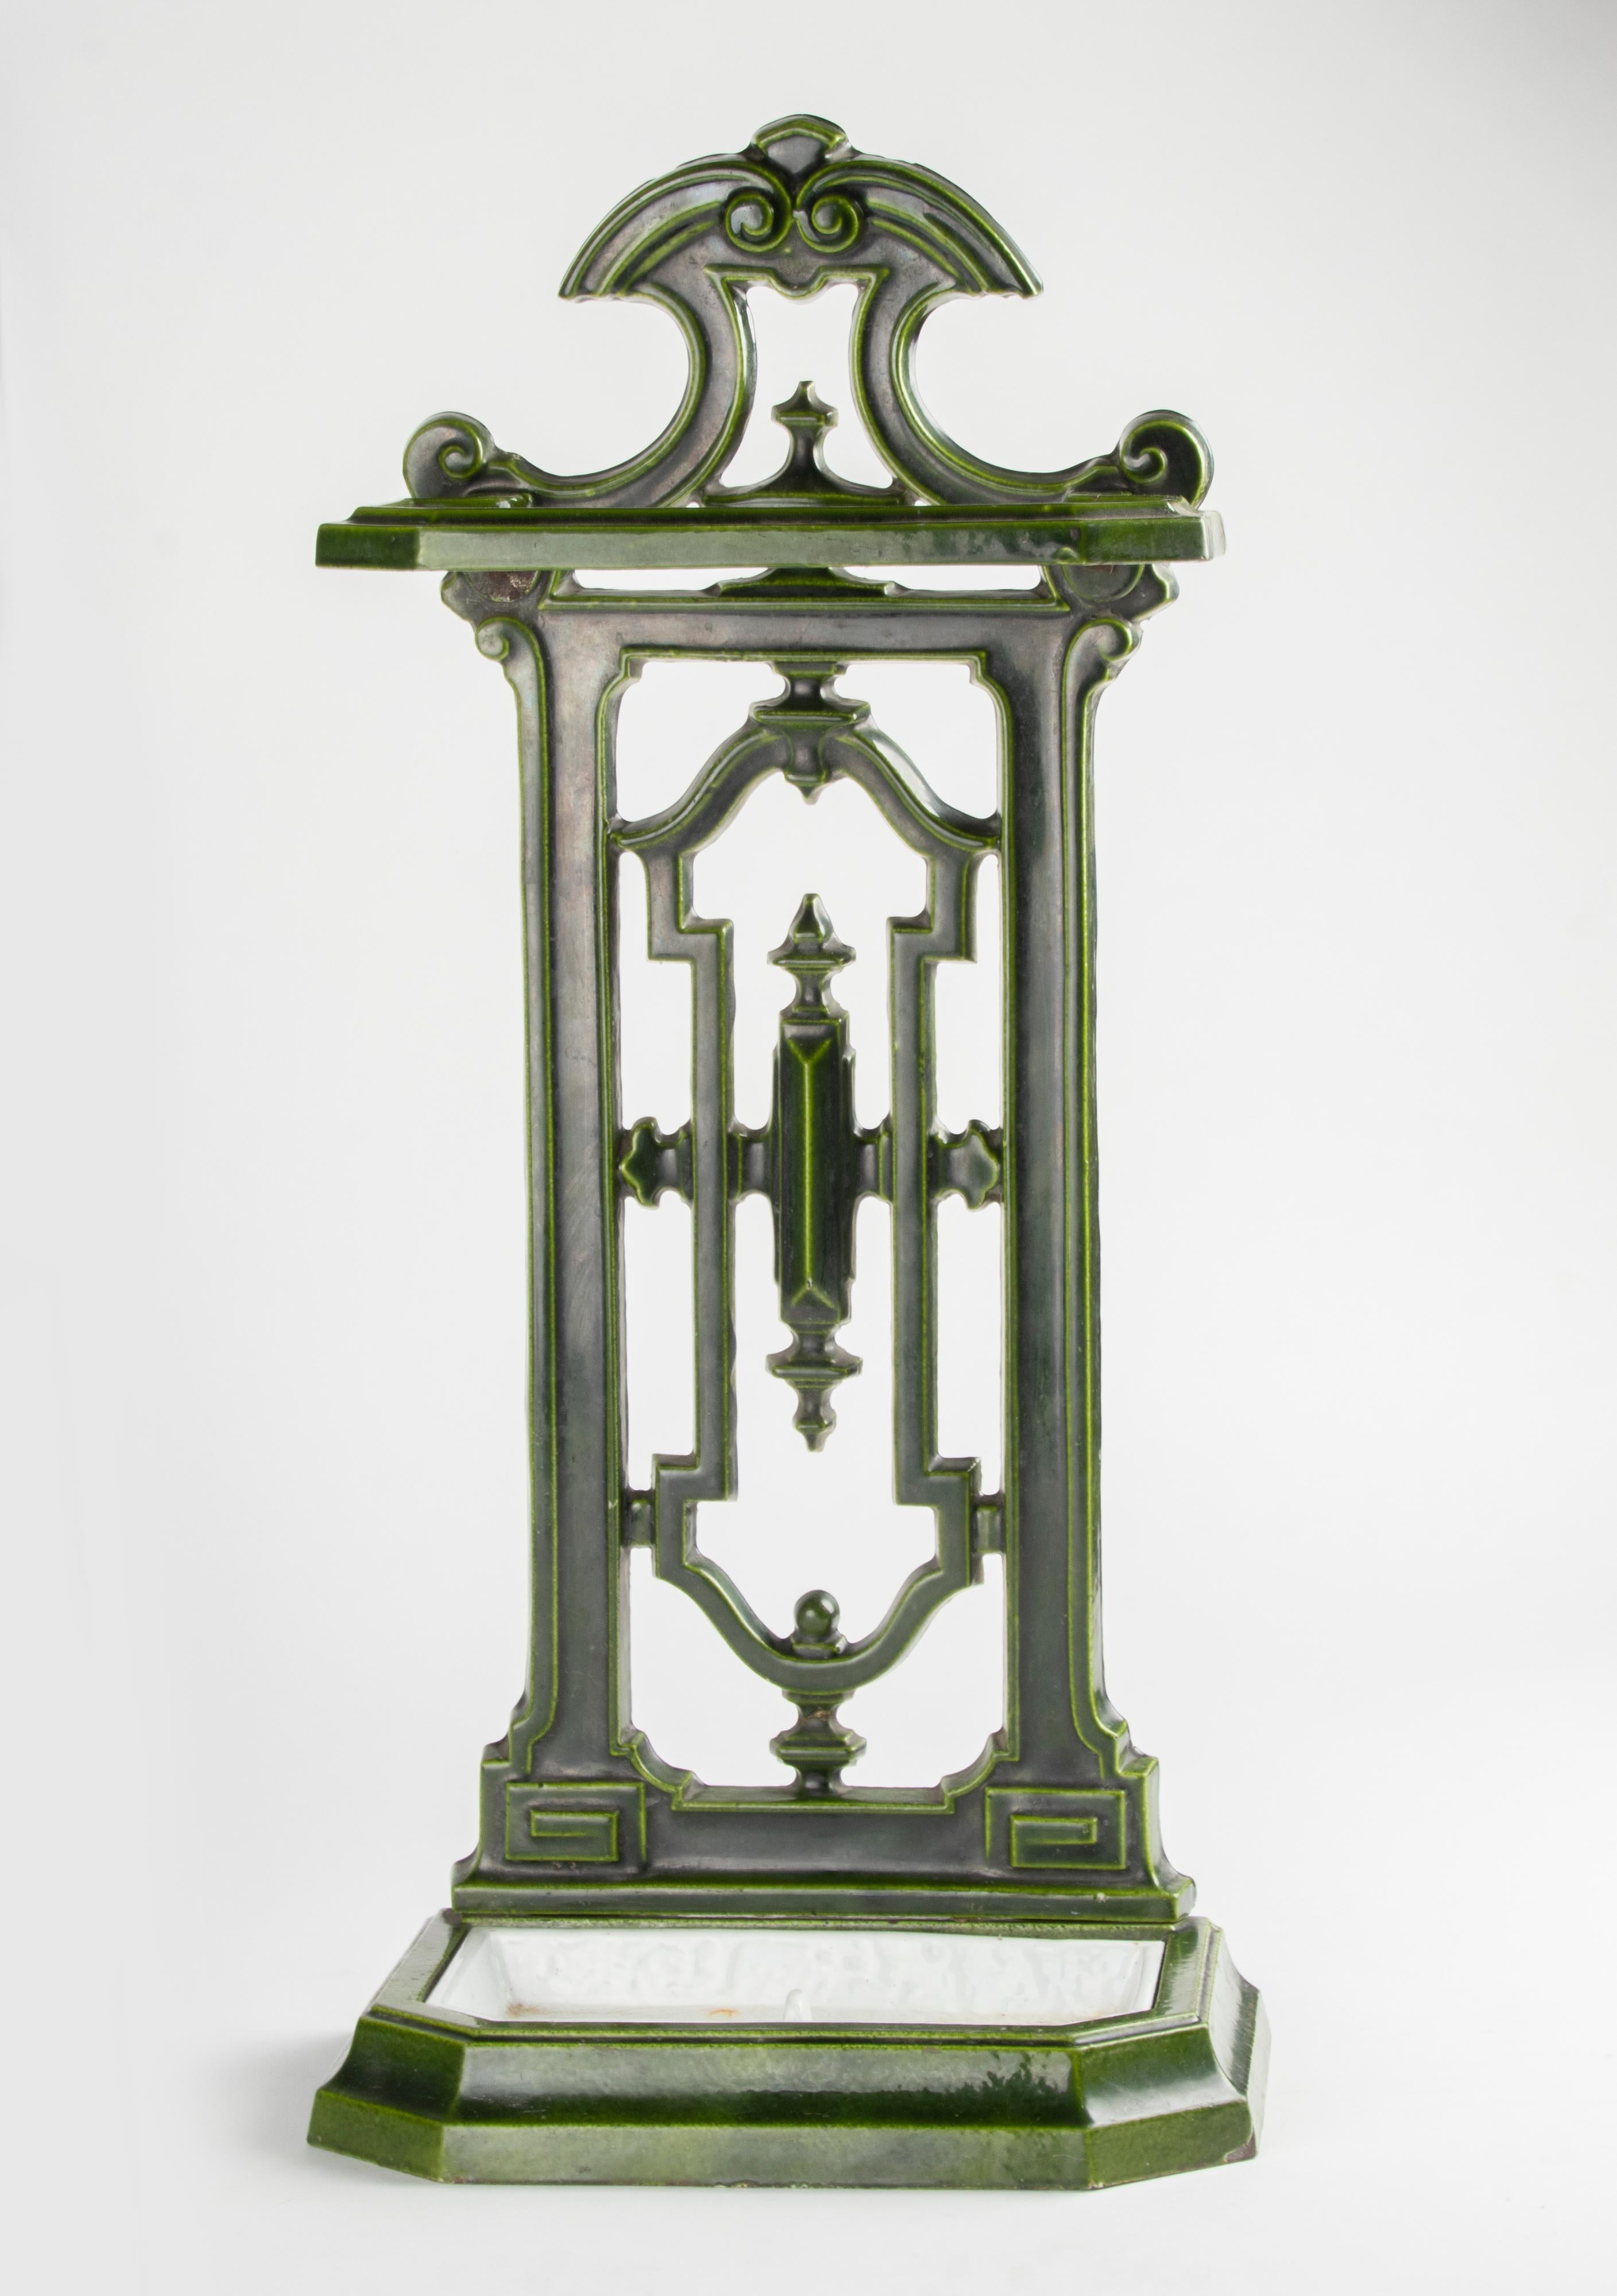 French cast iron Umbrella stand. Made of cast iron, enamelled in a green color.
With removable drip tray.
The stand is in very nice condition.
Dates from about 1910-1920.